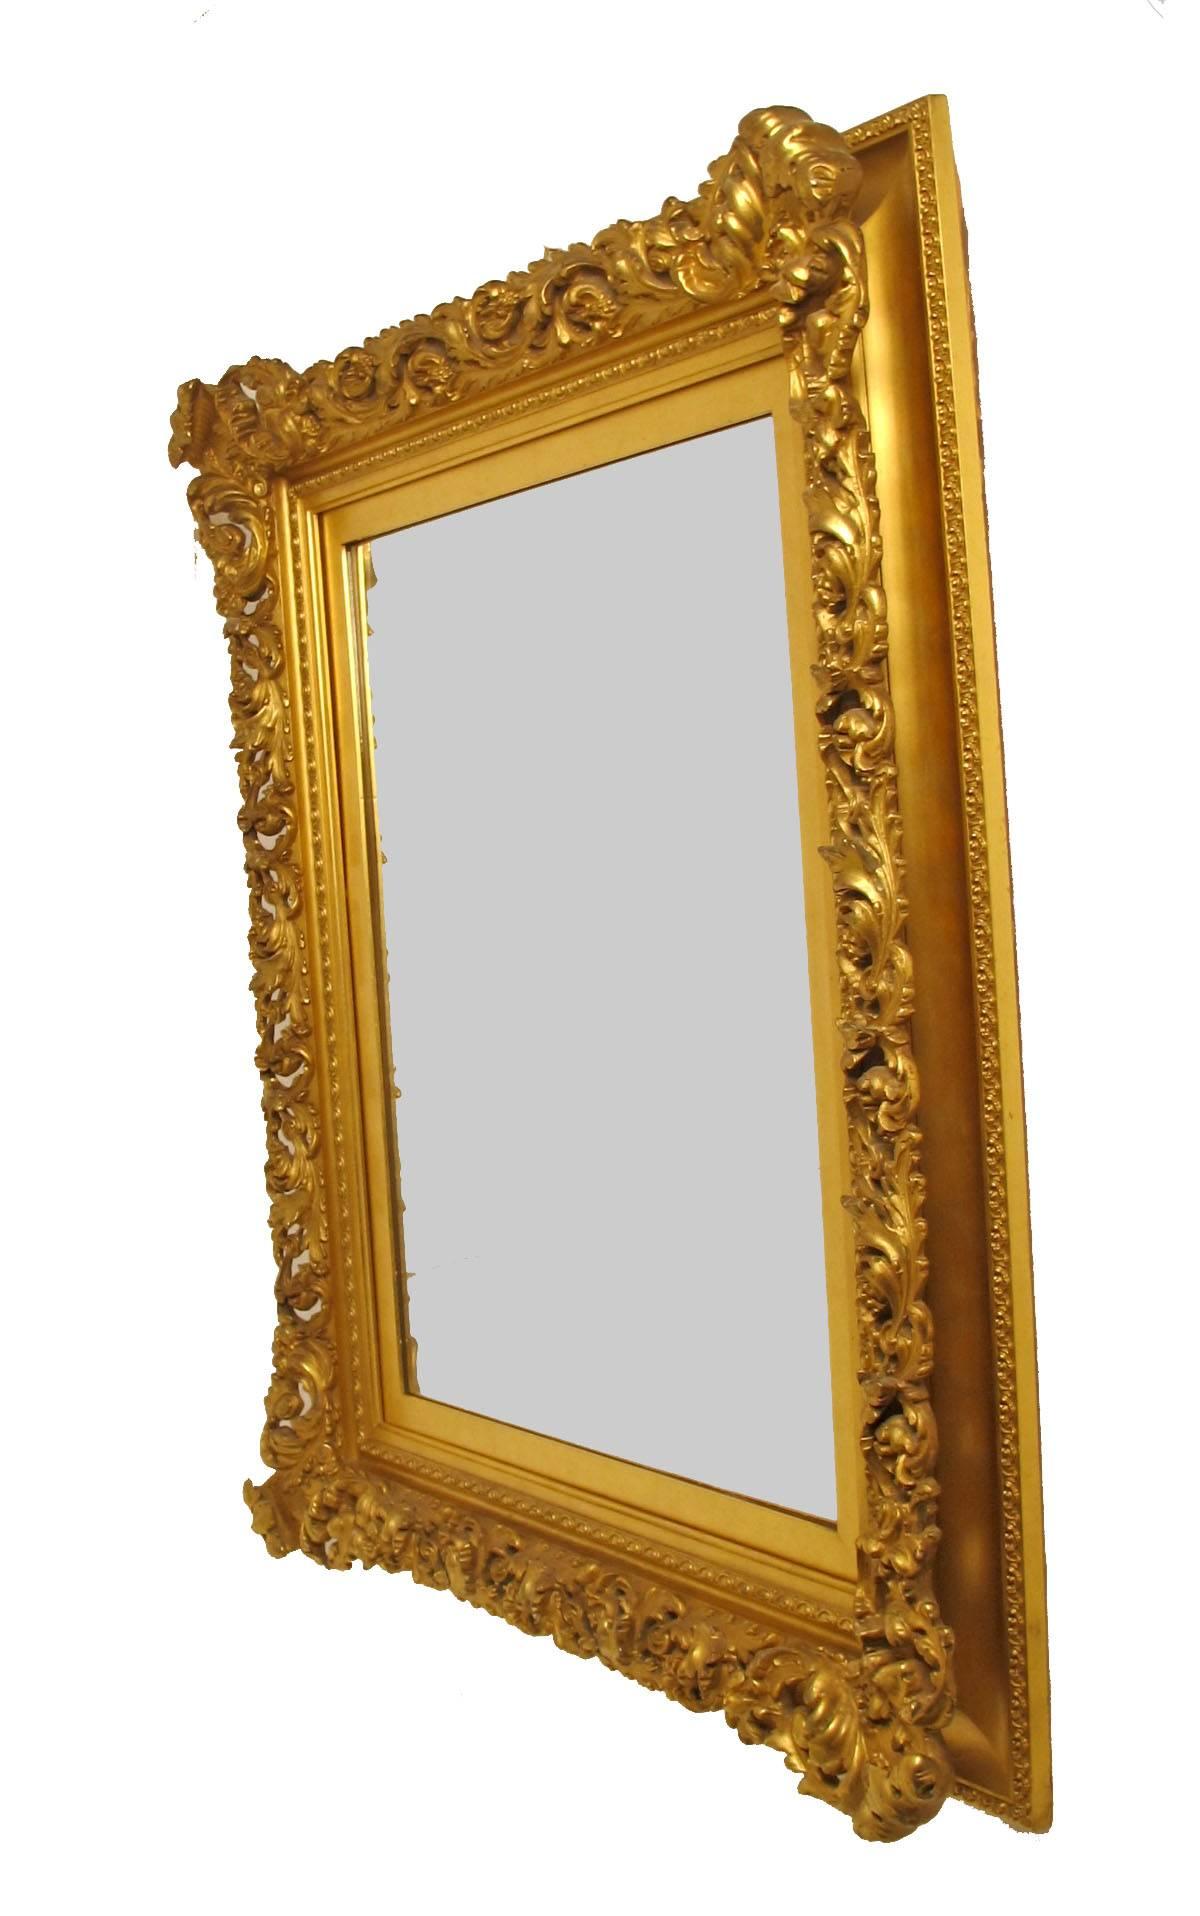 A very fine quality mercury gilded portrait frame now converted to a mirror. Beautiful antique condition. American, late 19th century.